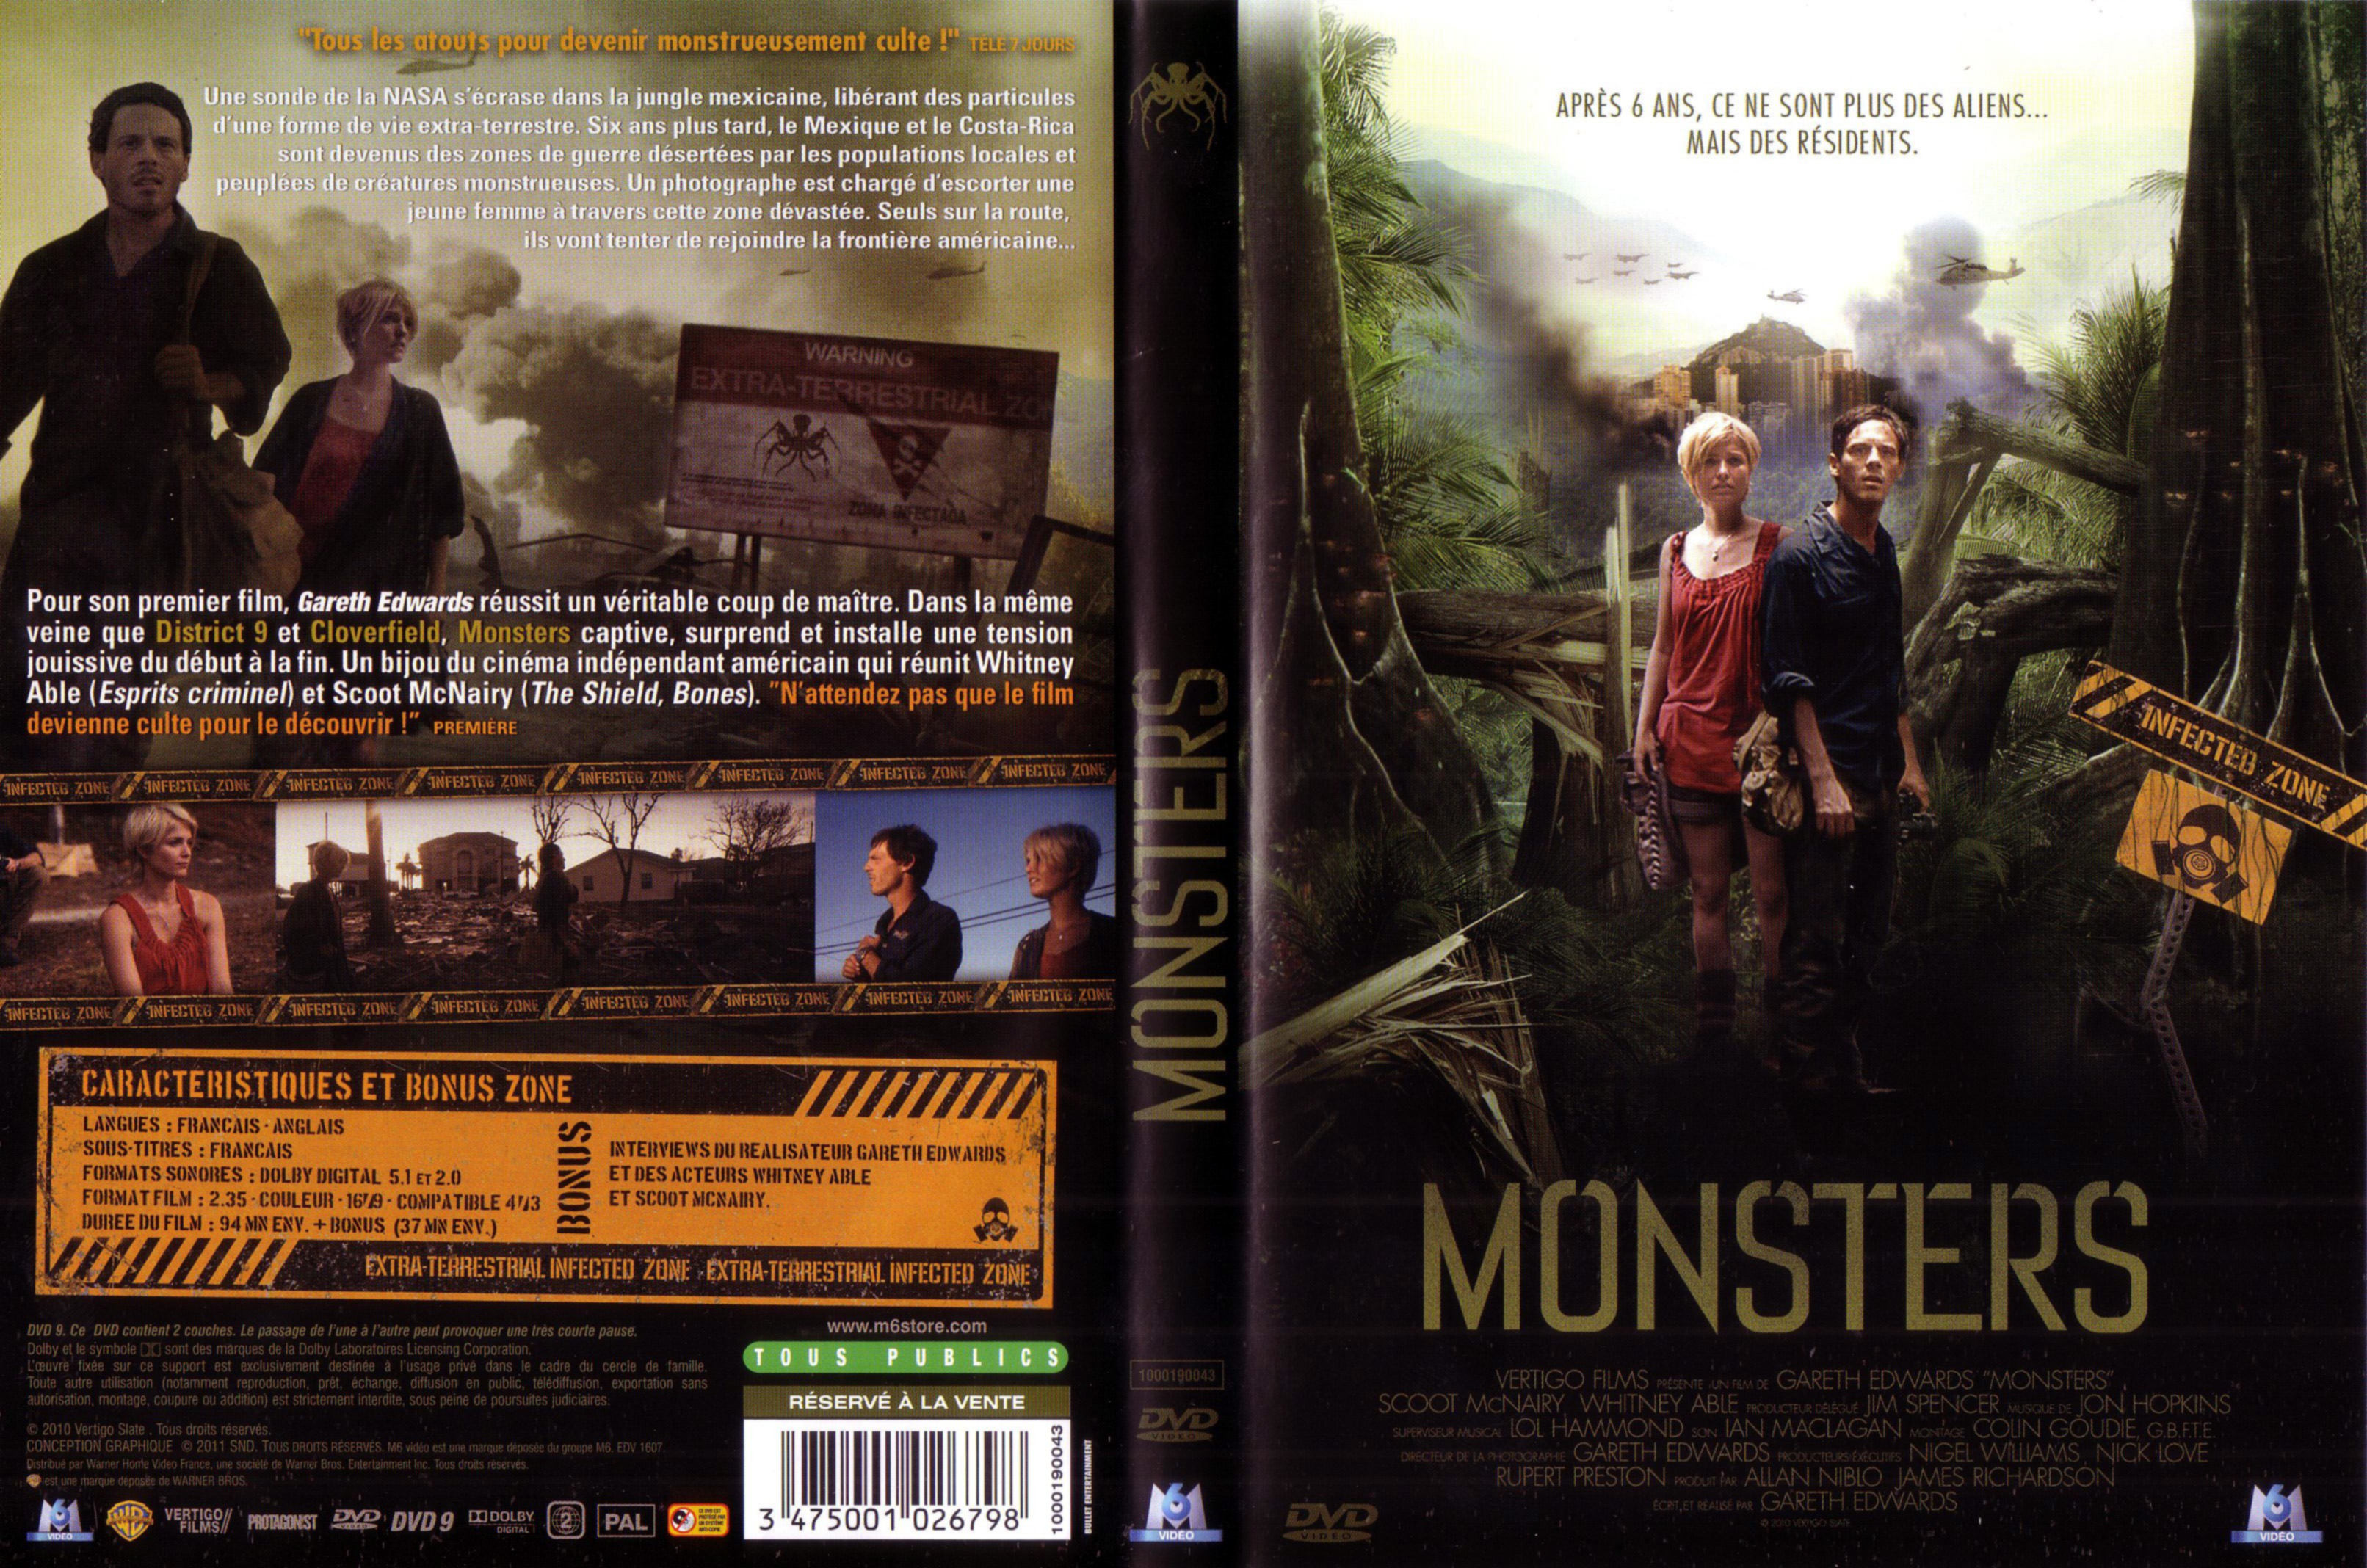 Jaquette DVD Monsters